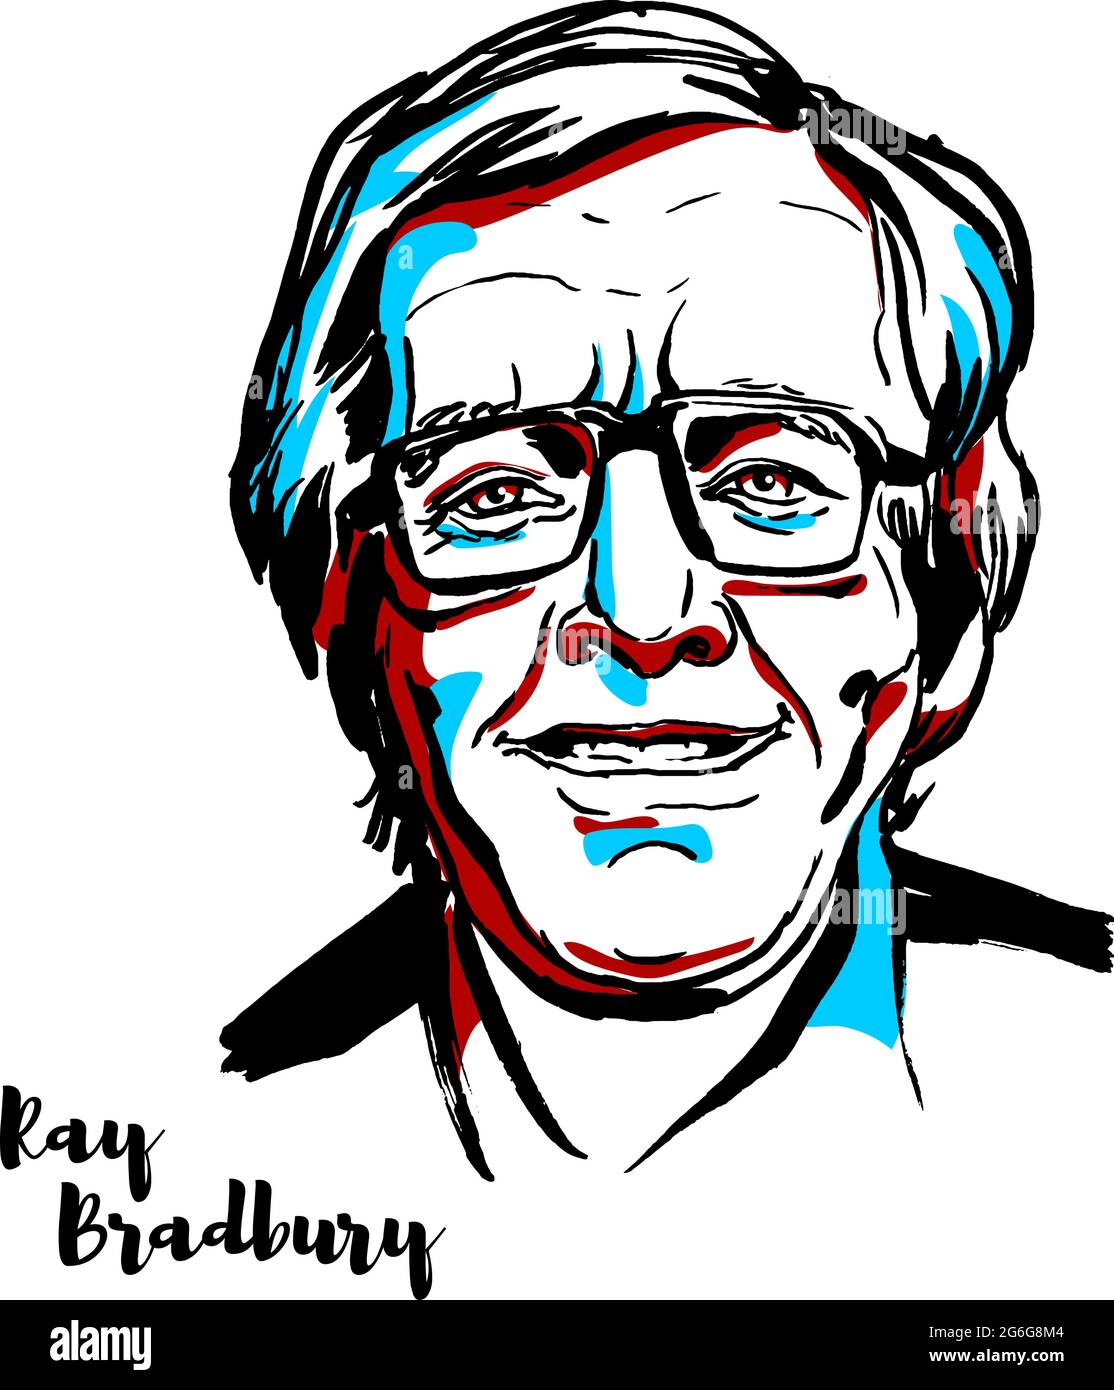 MOSCOW, RUSSIA - AUGUST 21, 2018: Ray Bradbury engraved vector portrait with ink contours. American author and screenwriter. Stock Vector